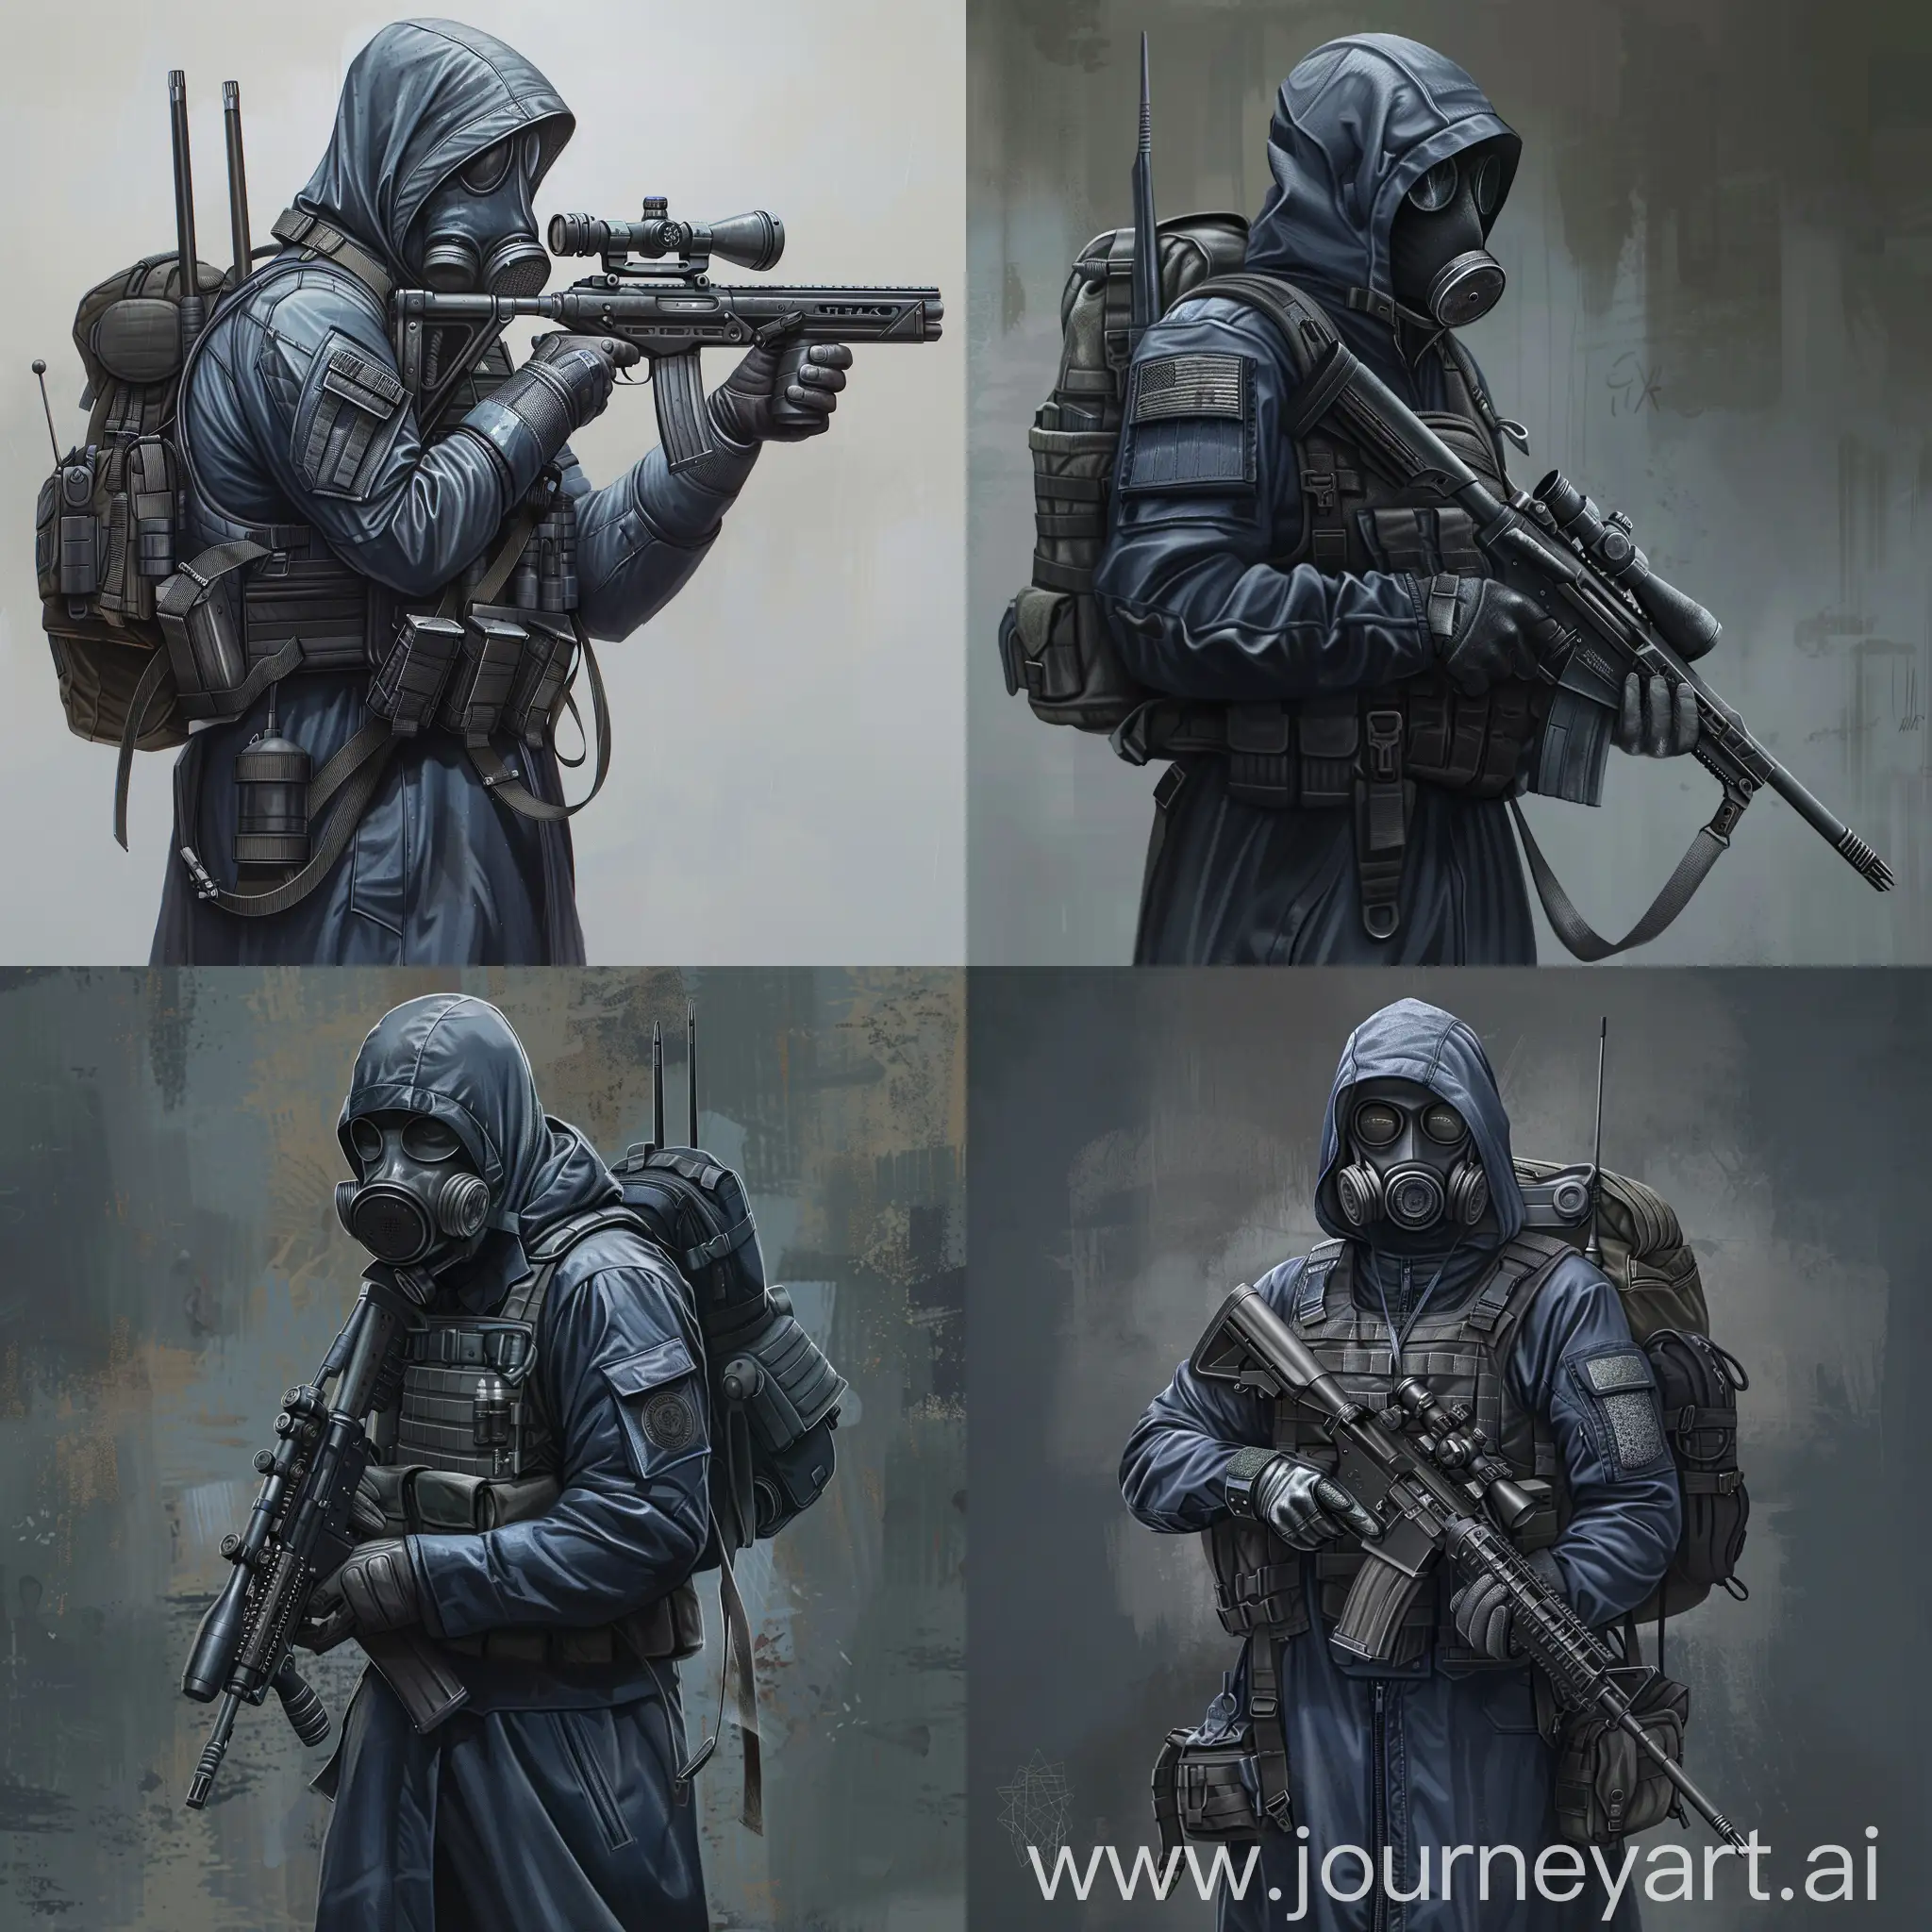 Mercenary-with-Sniper-Rifle-in-STALKER-Universe